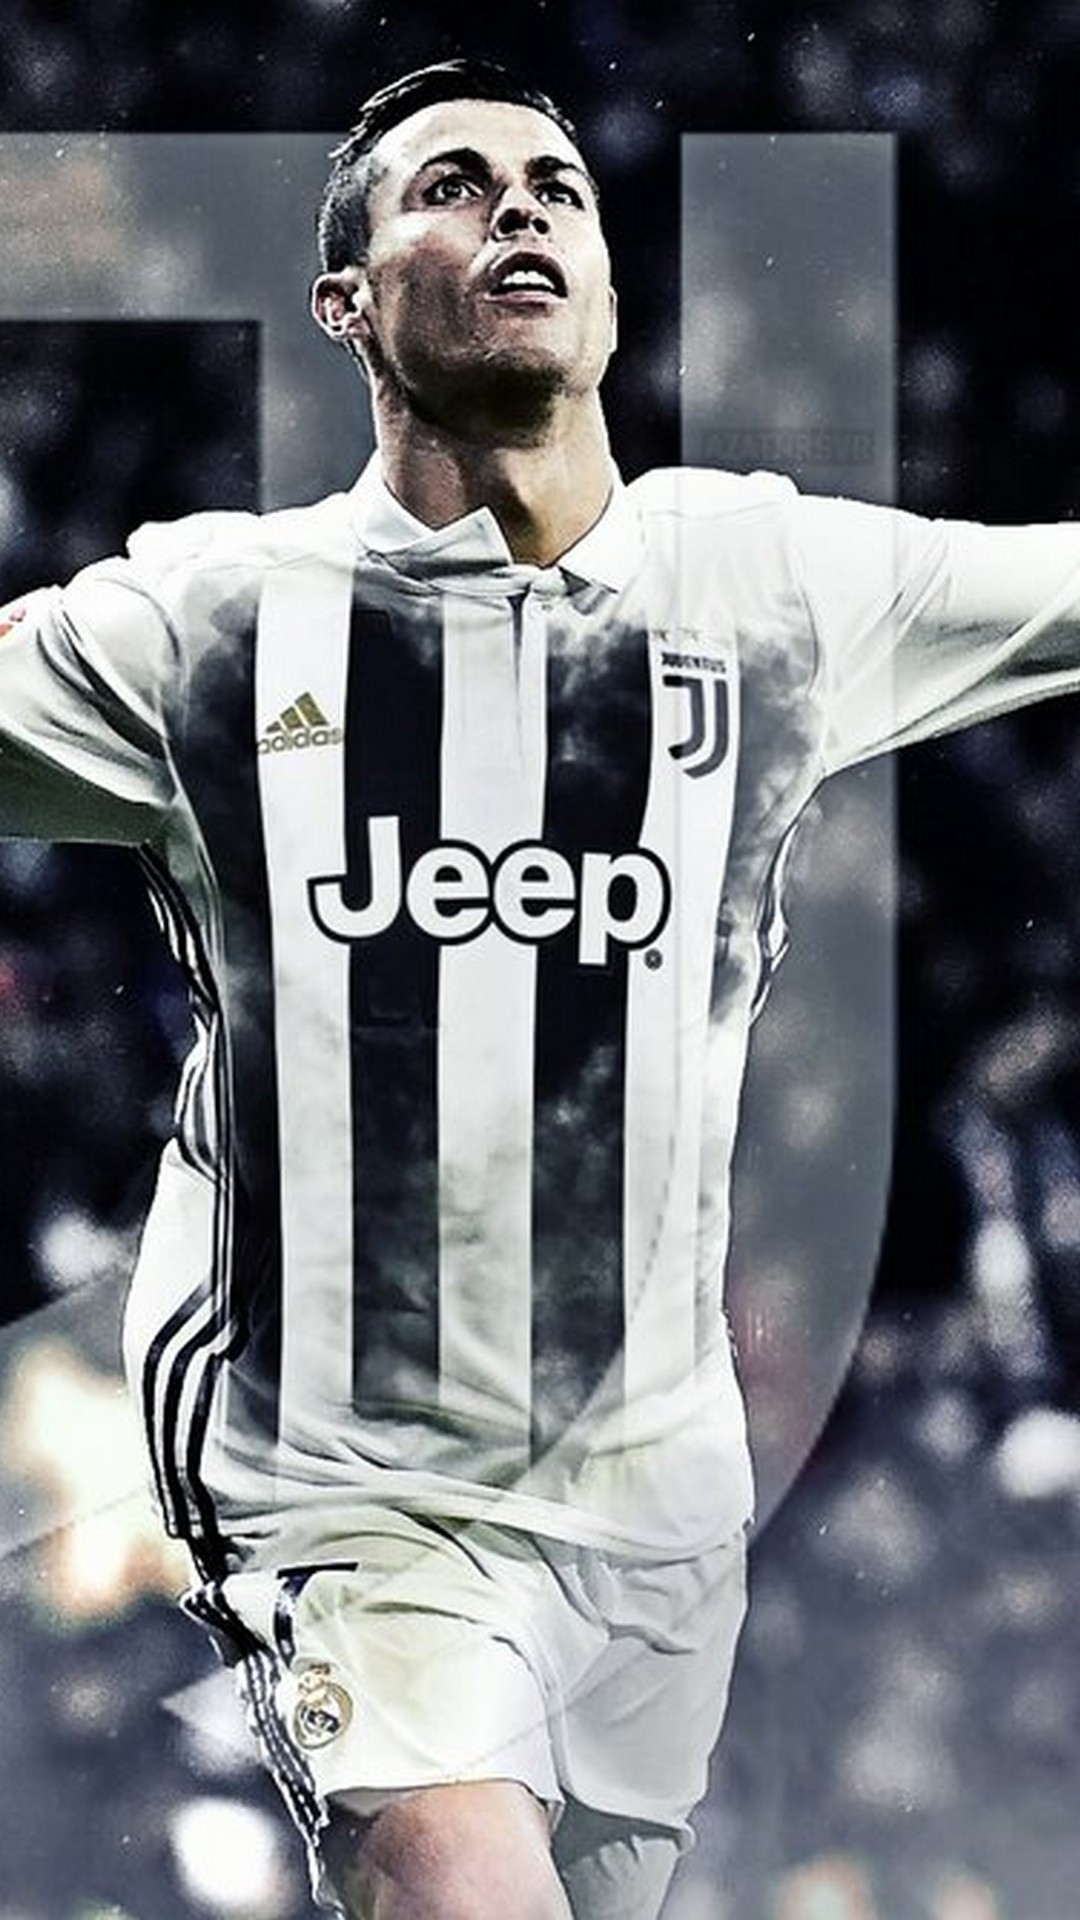 CR7 Juventus Wallpaper iPhone with image resolution 1080x1920 pixel. You can make this wallpaper for your iPhone 5, 6, 7, 8, X backgrounds, Mobile Screensaver, or iPad Lock Screen